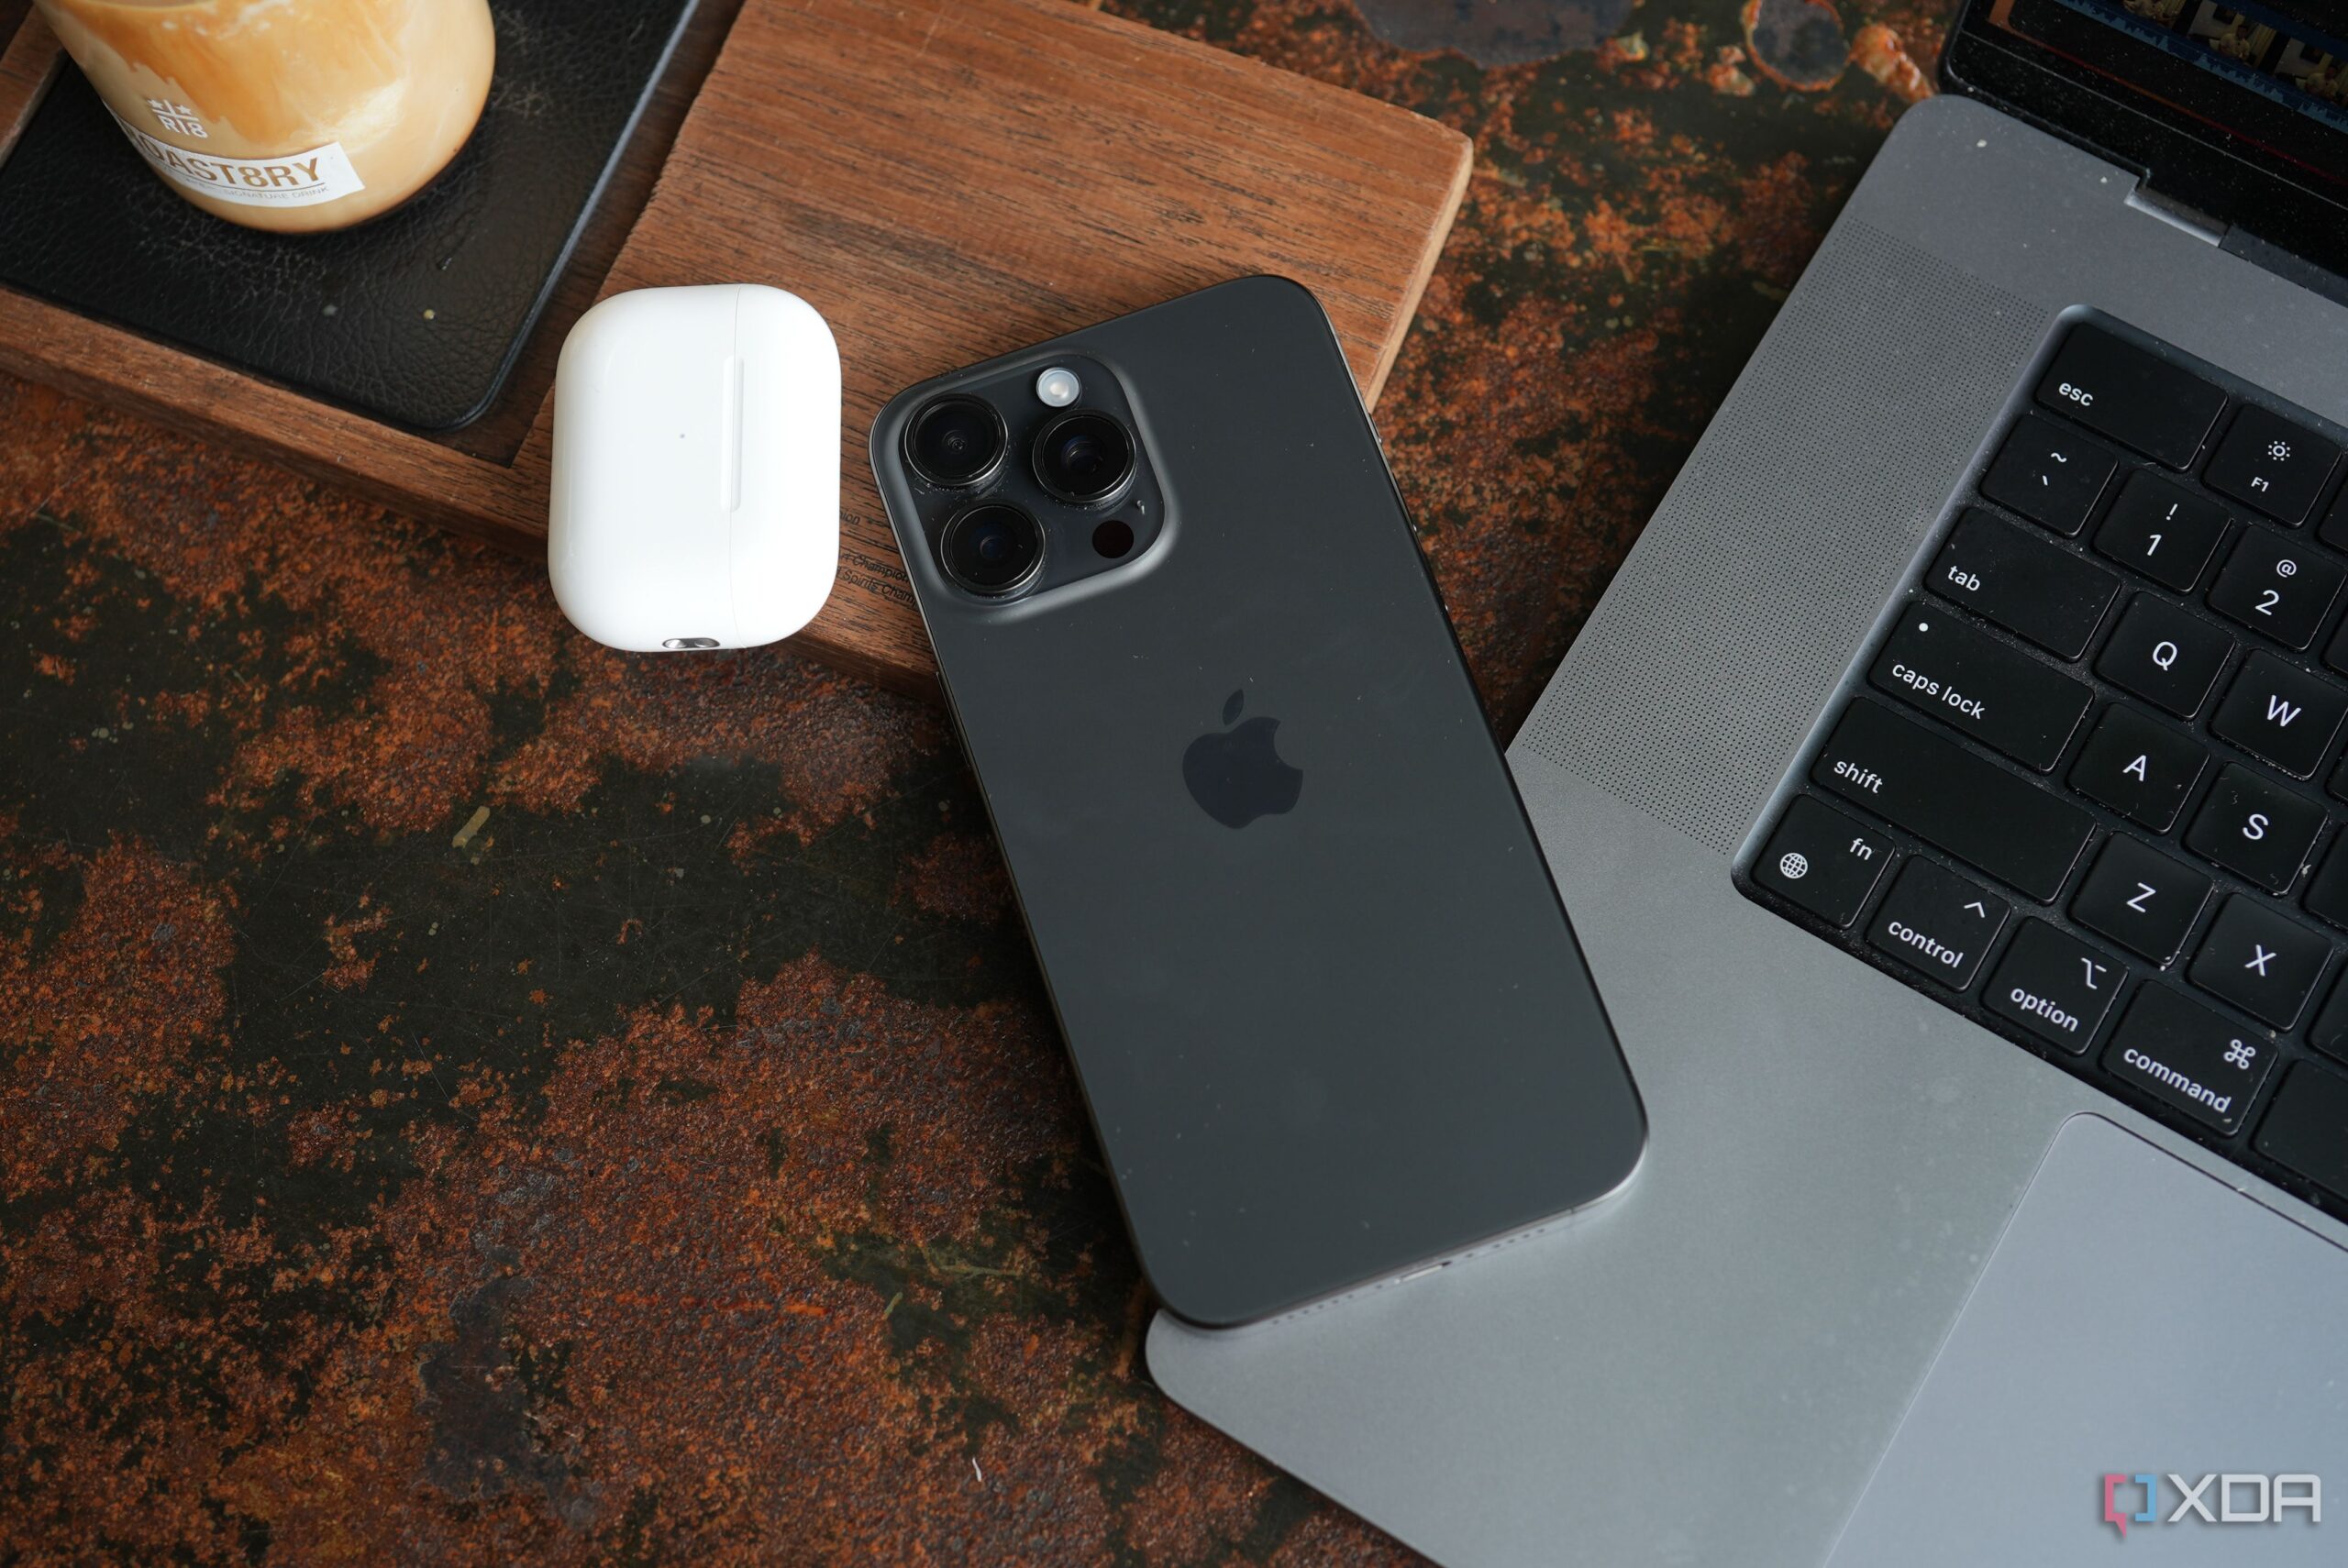 iOS 17.1.2 and macOS Sonoma 14.1.2 are now available, here’s what’s new